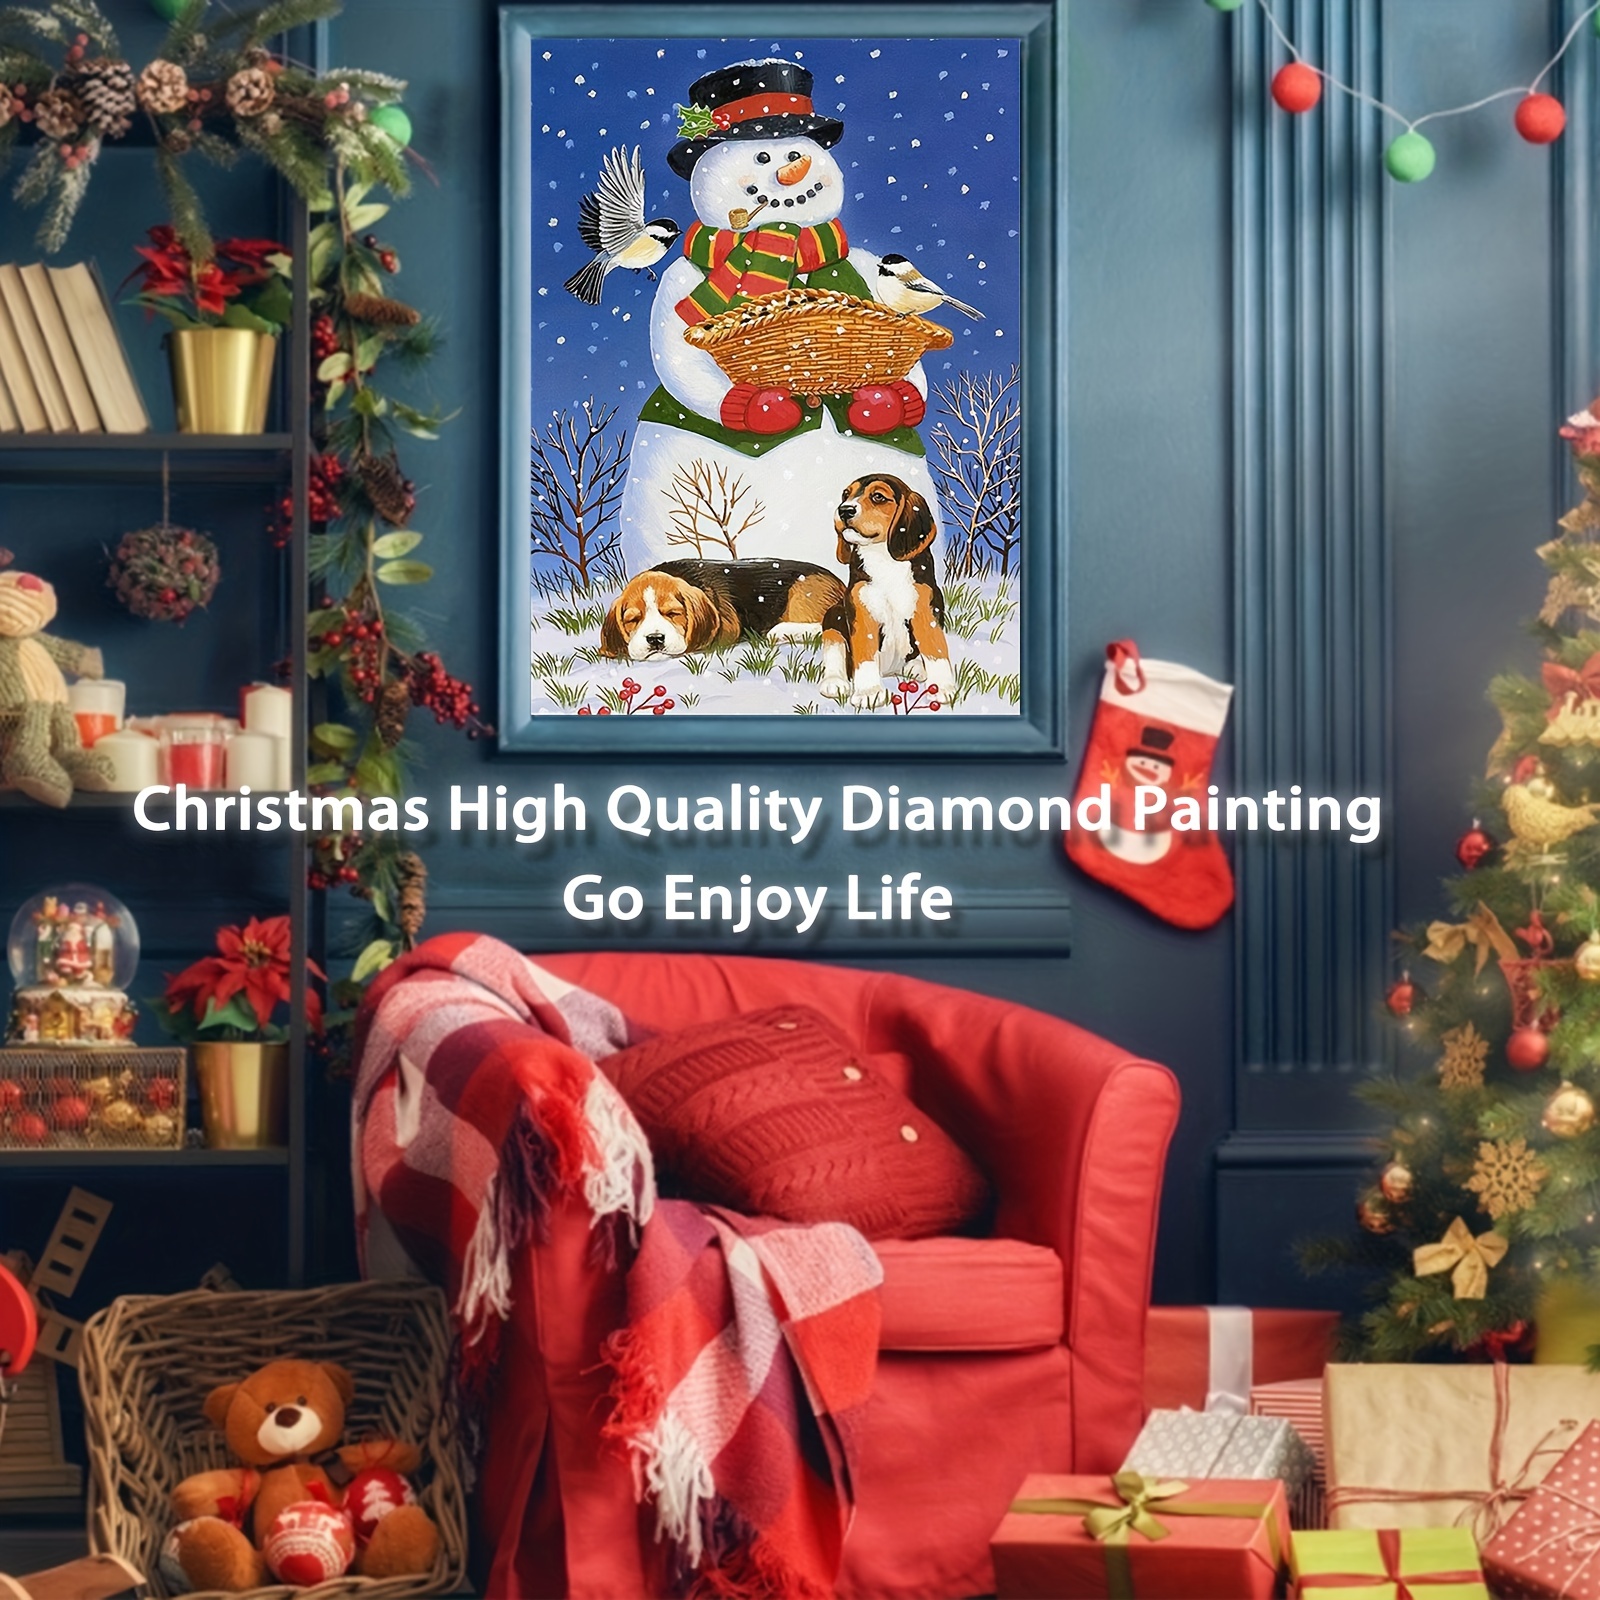 Christmas Vacation Diamond Art Painting Kits for Adults Full Drill Diamond  Dots Paintings for Beginners, Round 5D Paint with Diamonds Pictures Gem Art  Painting Kits DIY Adult Crafts Kits 12x16inch 